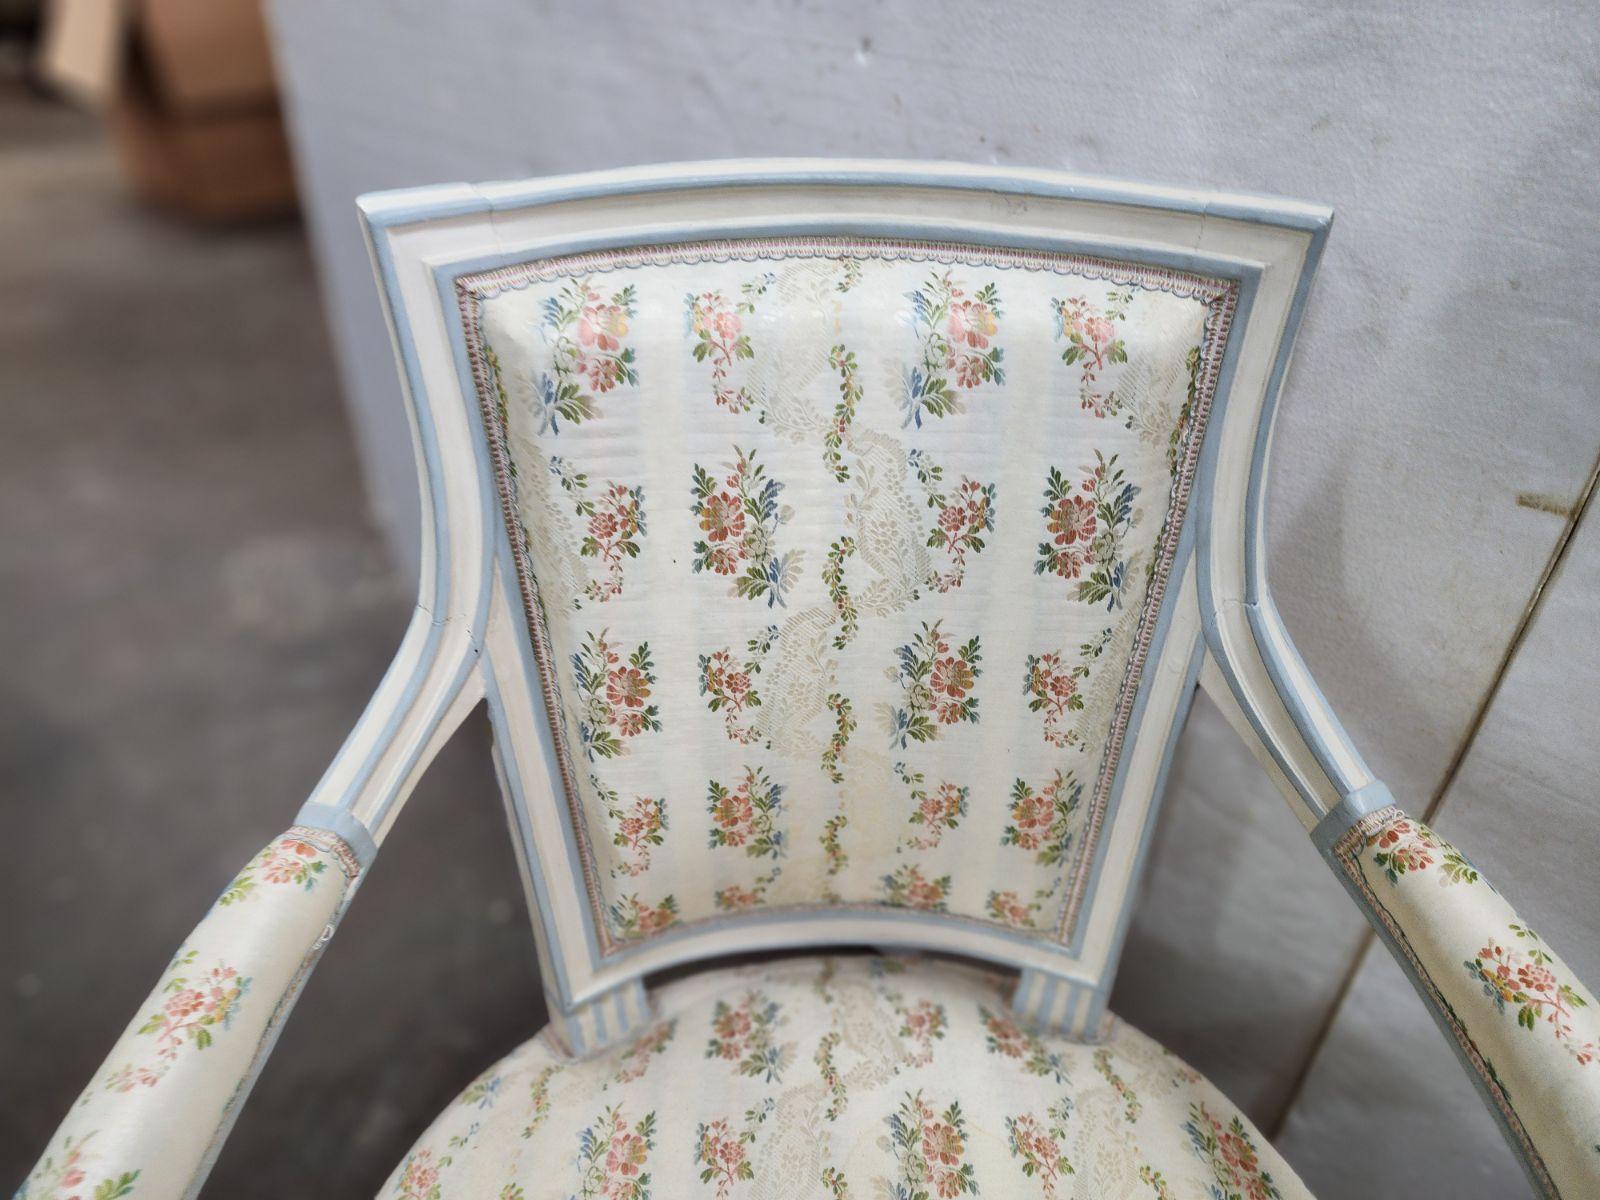 These French Directoire style open arm chairs from around 1910 are a charming and elegant pair. With gently curved arms and delicate carved details, these chairs exude a timeless appeal. They are painted in a soft, neutral color and feature plush